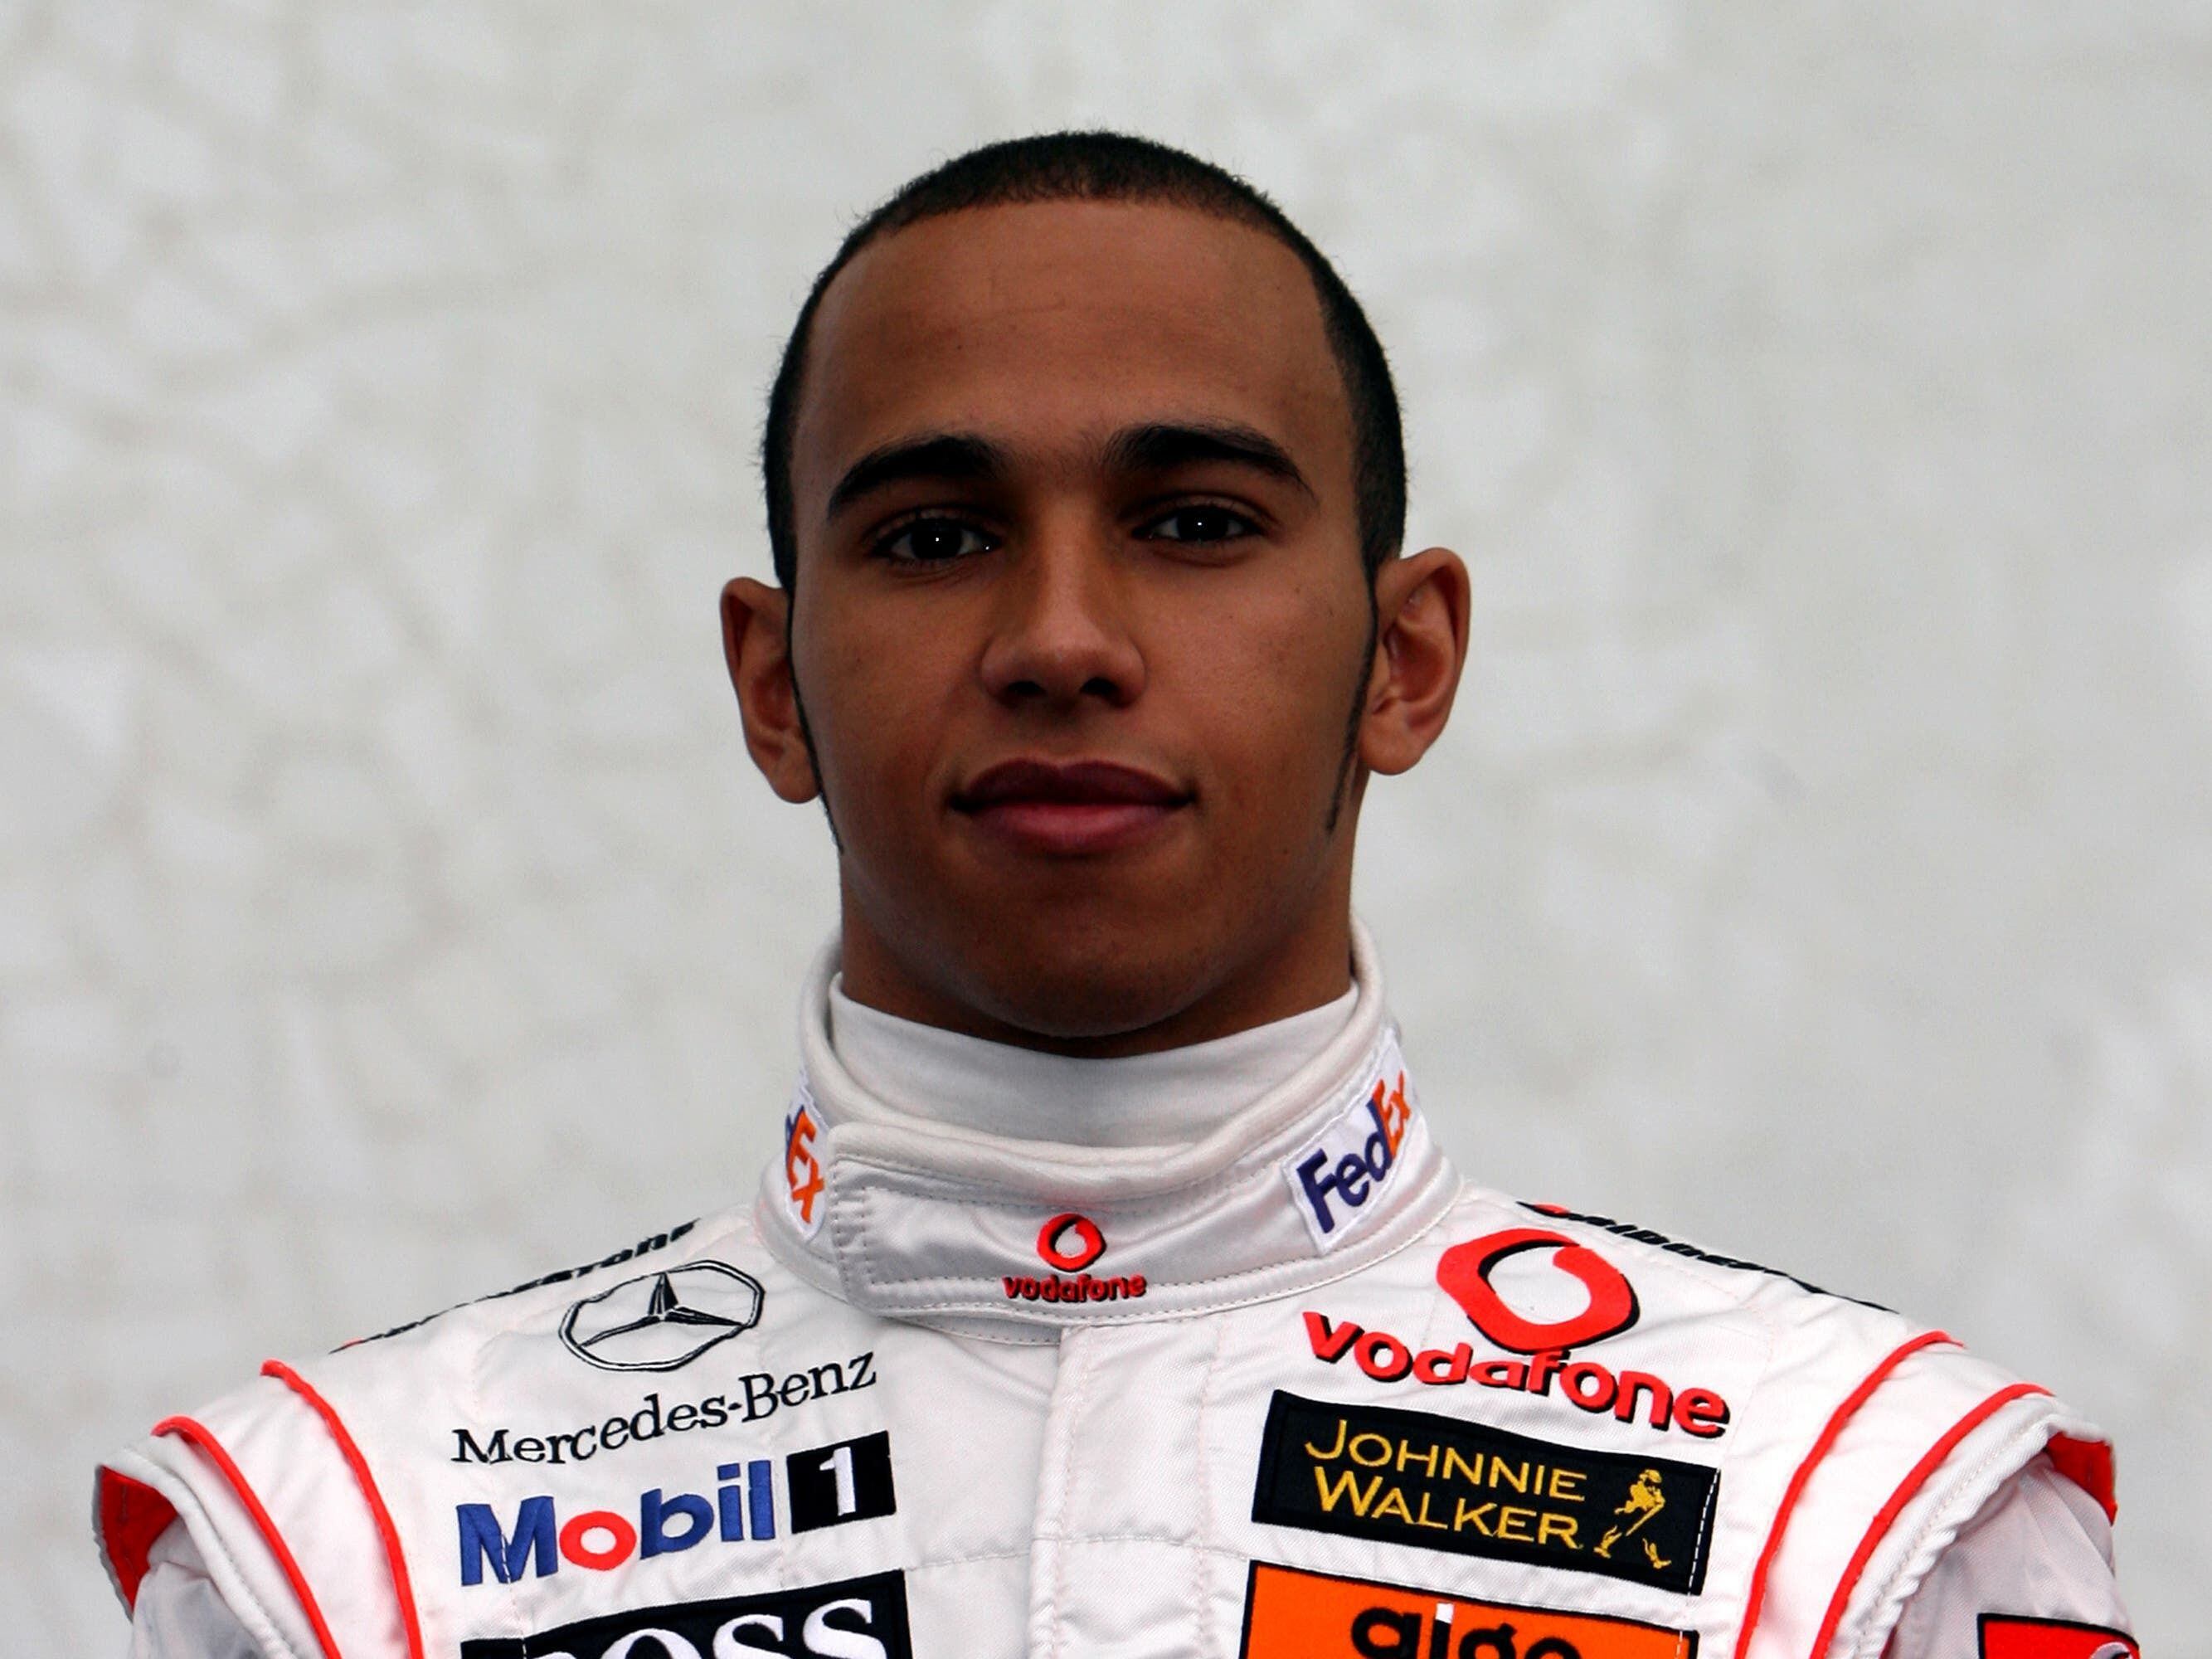 On this day in 2007: Lewis Hamilton earns first grand prix victory